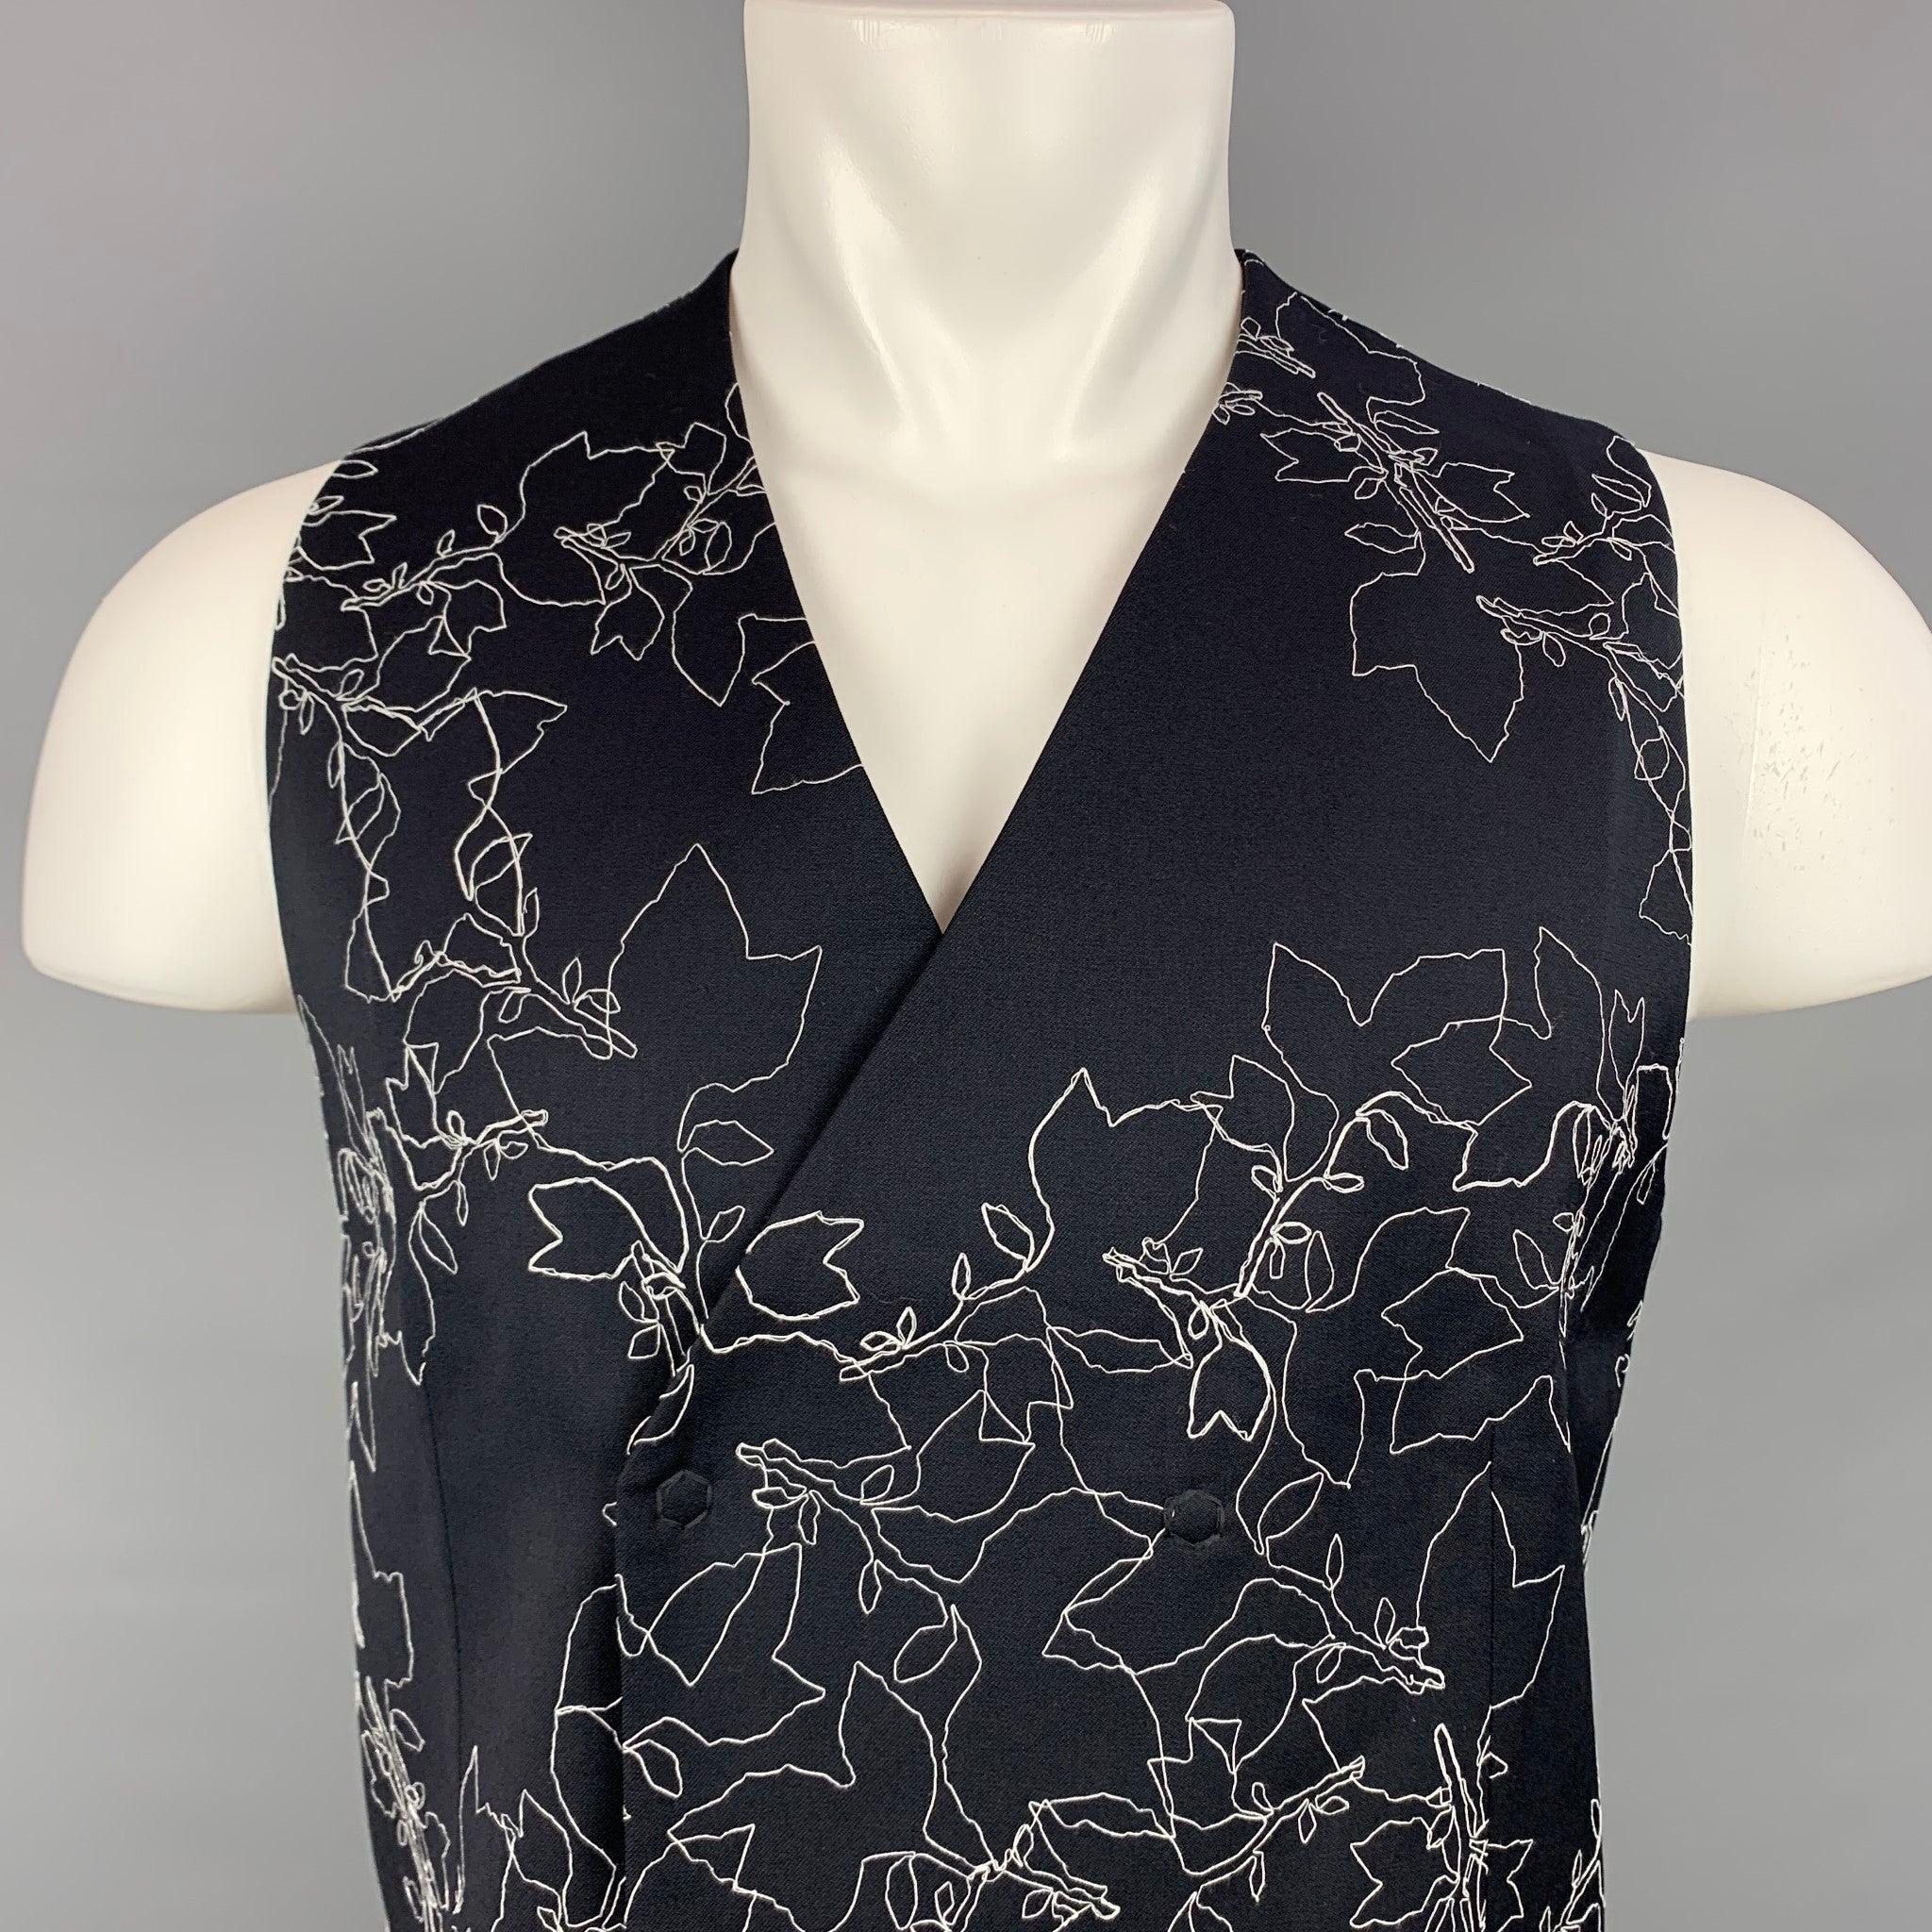 EMPORIO ARMANI vest comes in a black & white wool with a embroidered design featuring a full liner and a double breasted snap button closure. Made in Italy.New With Tags.
 

Marked:   IT 48 / CHN 175/96A / BRA 48 / MEX 48 / USA 48  

Measurements: 
